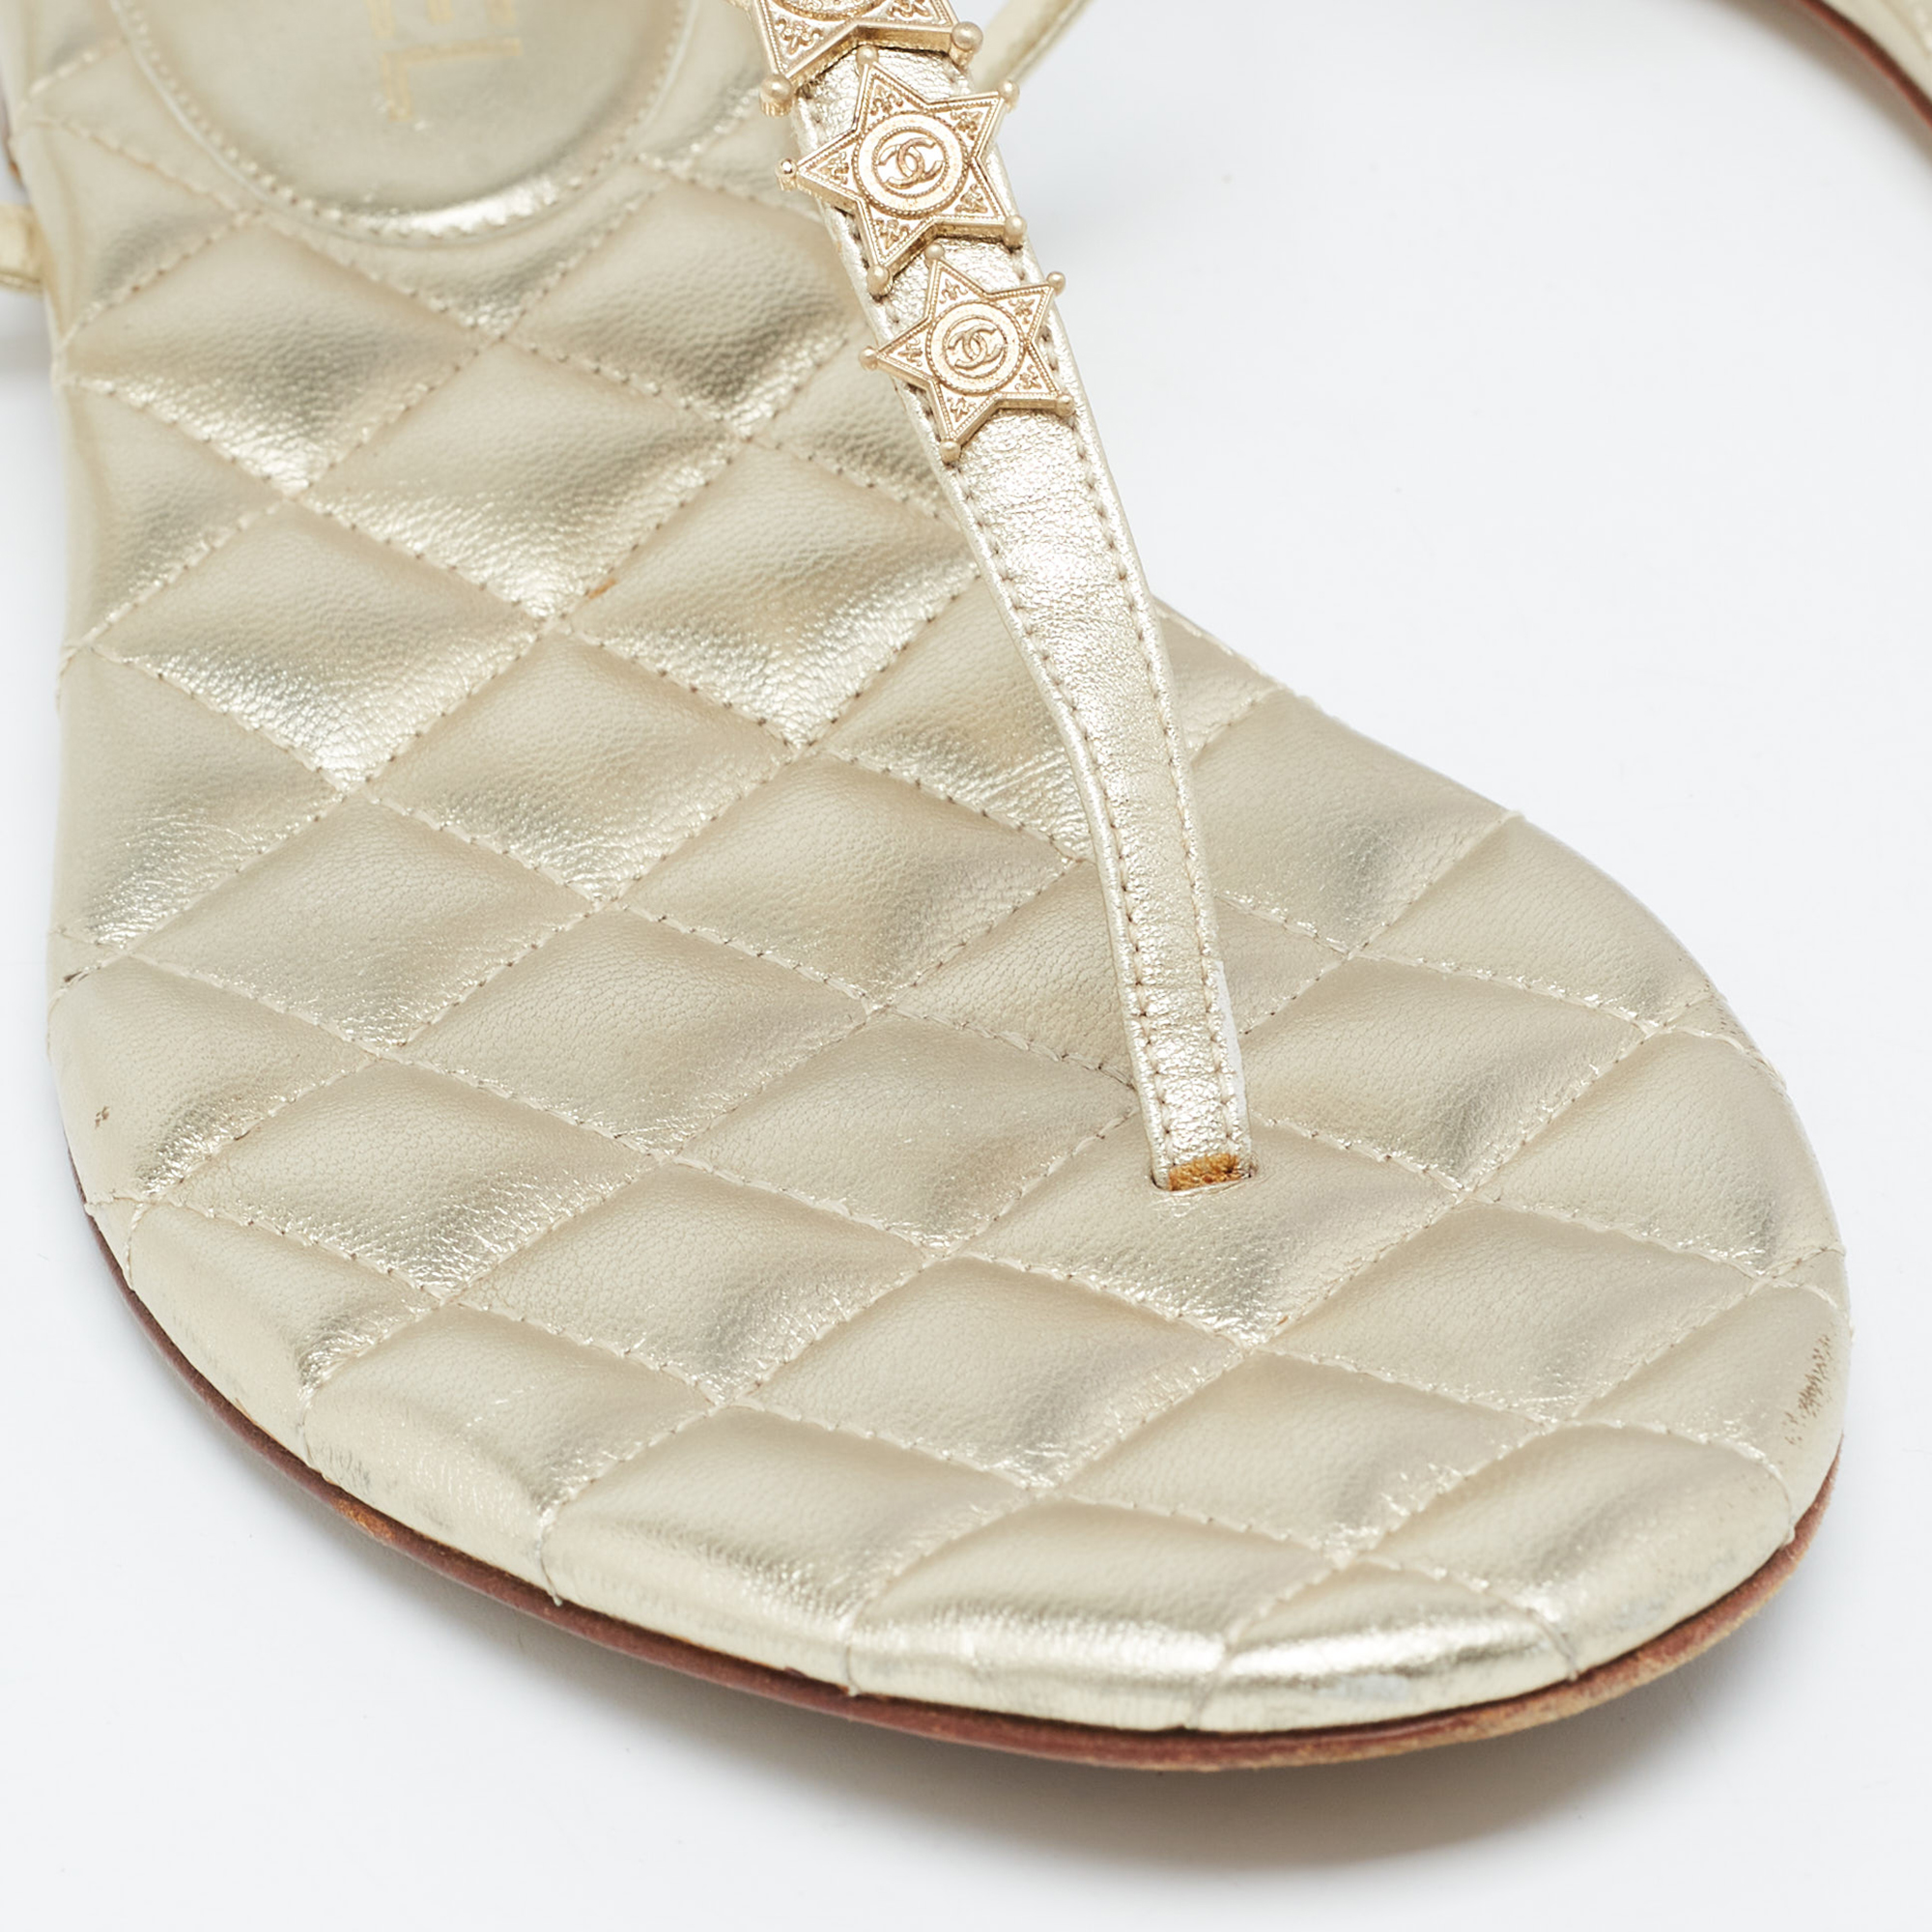 Chanel Gold Leather CC Star Embellished Thong Flat Sandals Size 40